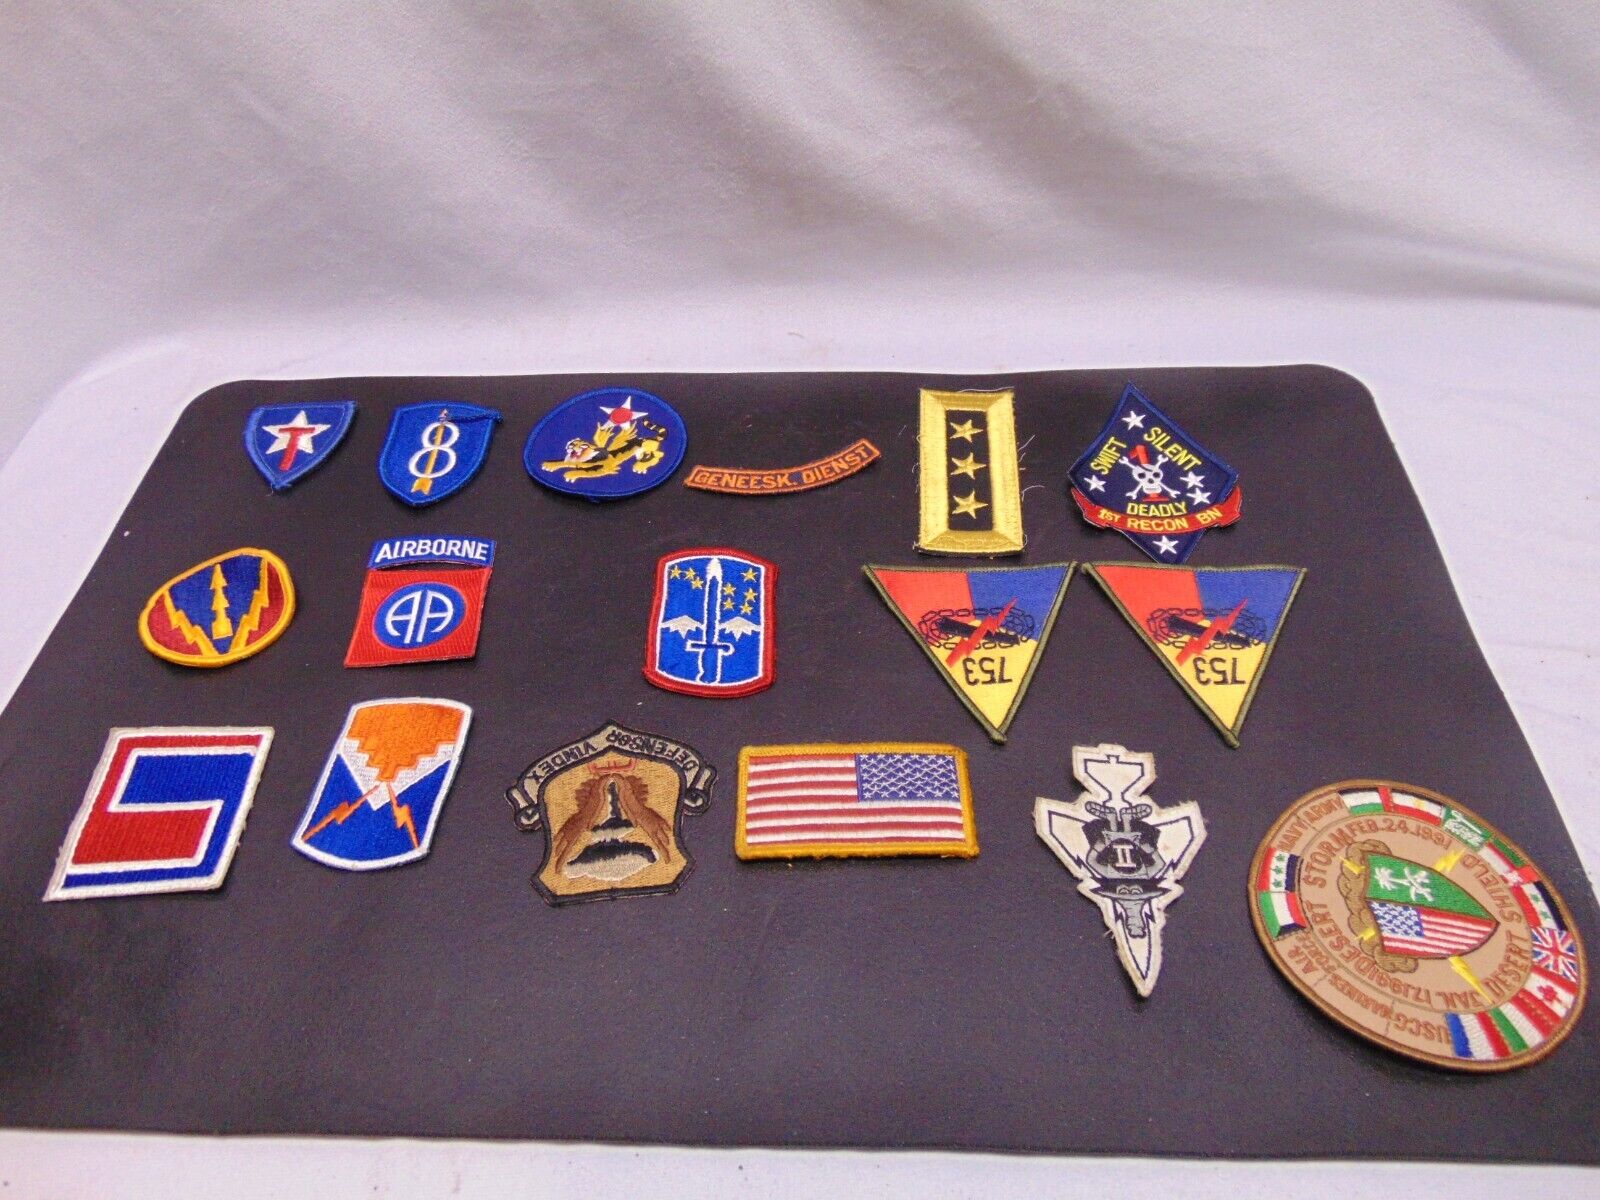 lot of 17 US Army Military Patches swords Airborne Defensor vindex 753 1st recon